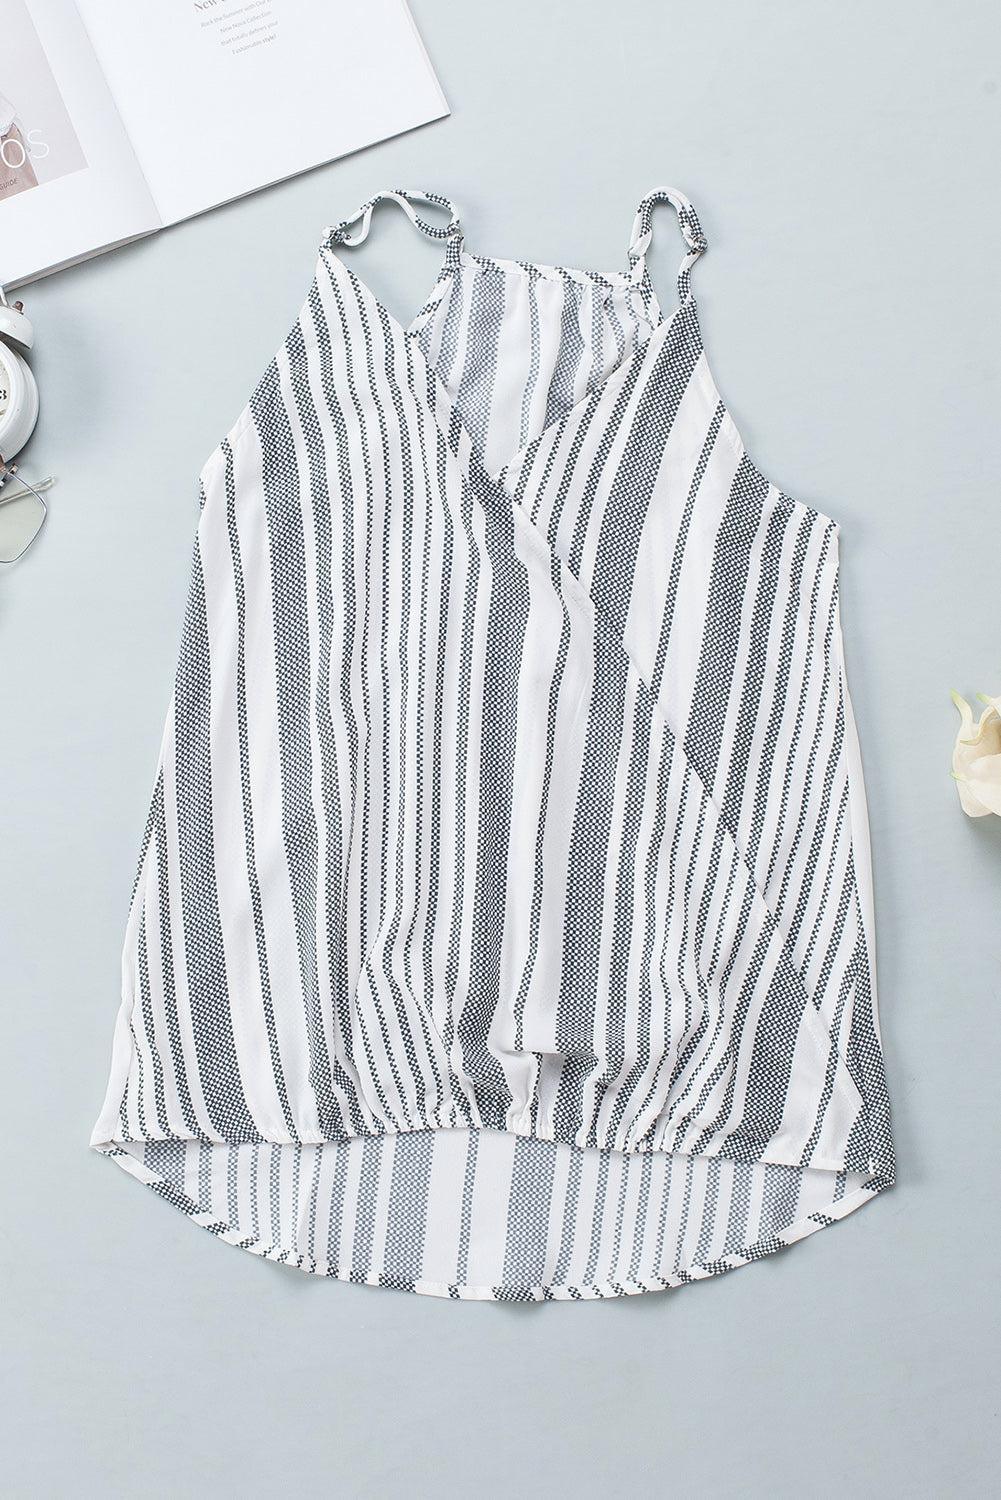 a white and black striped top next to a book